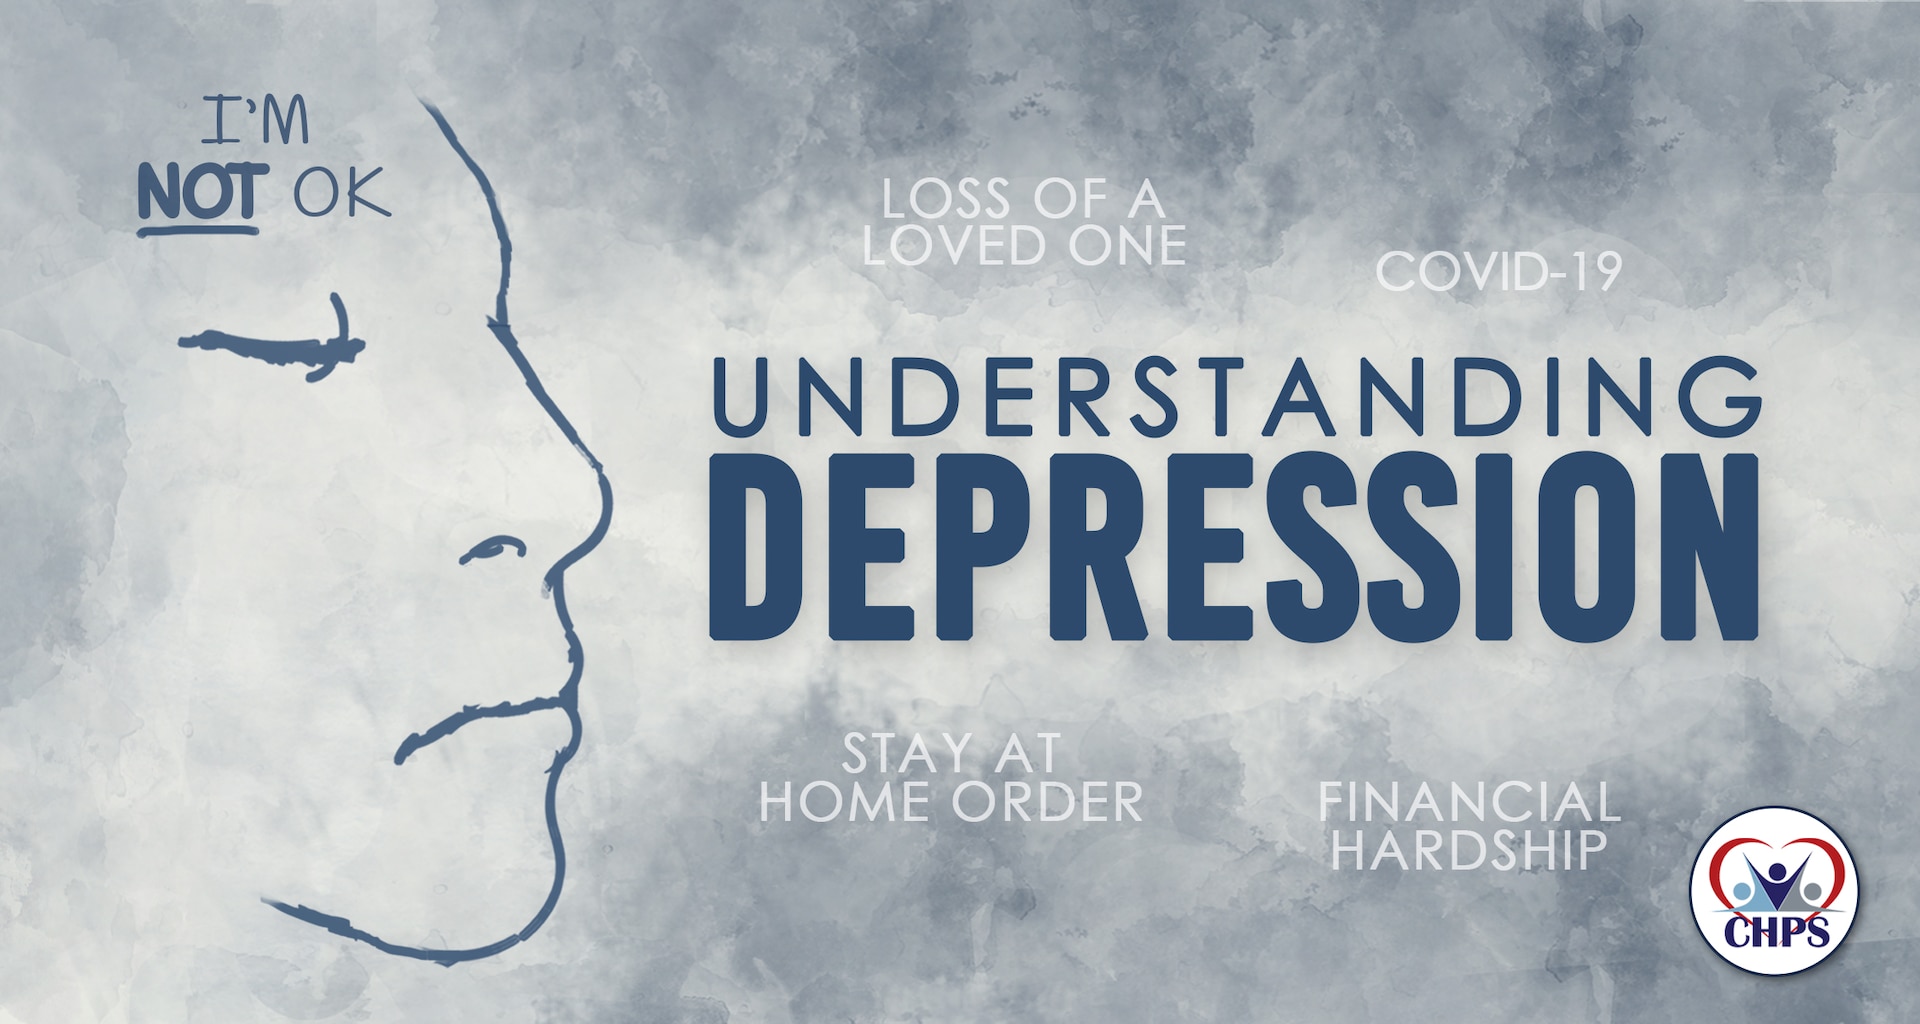 The National Institute for Mental Health defines depression as a common but serious mood disorder that negatively affects how you feel, think, and handle daily activities such as sleeping, eating, and working.